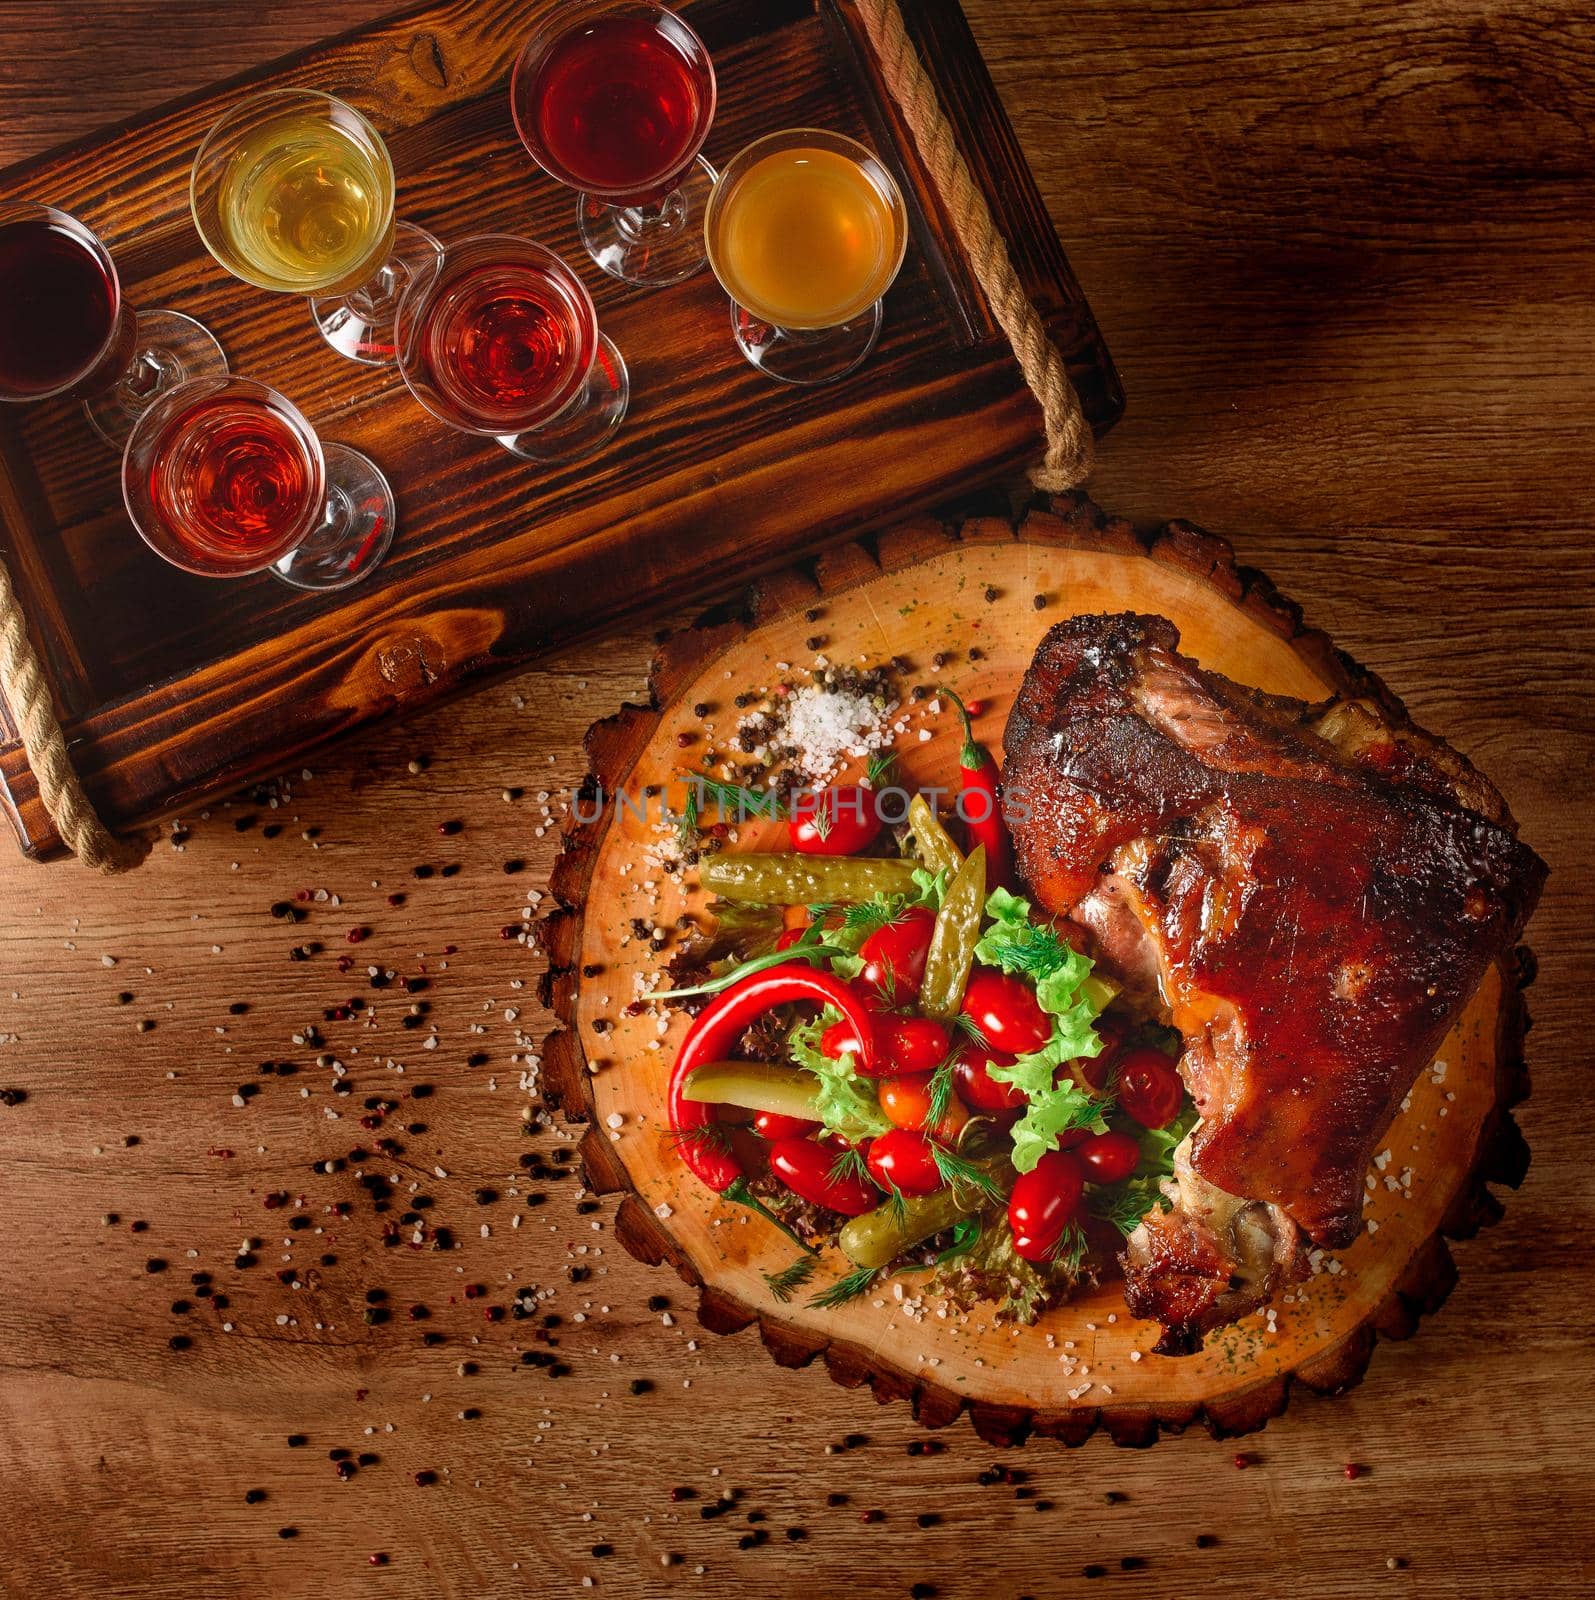 Pork knuckle with pickles, salad, vegetables, chili on a wooden board against the background of glasses with alcohol by Rabizo